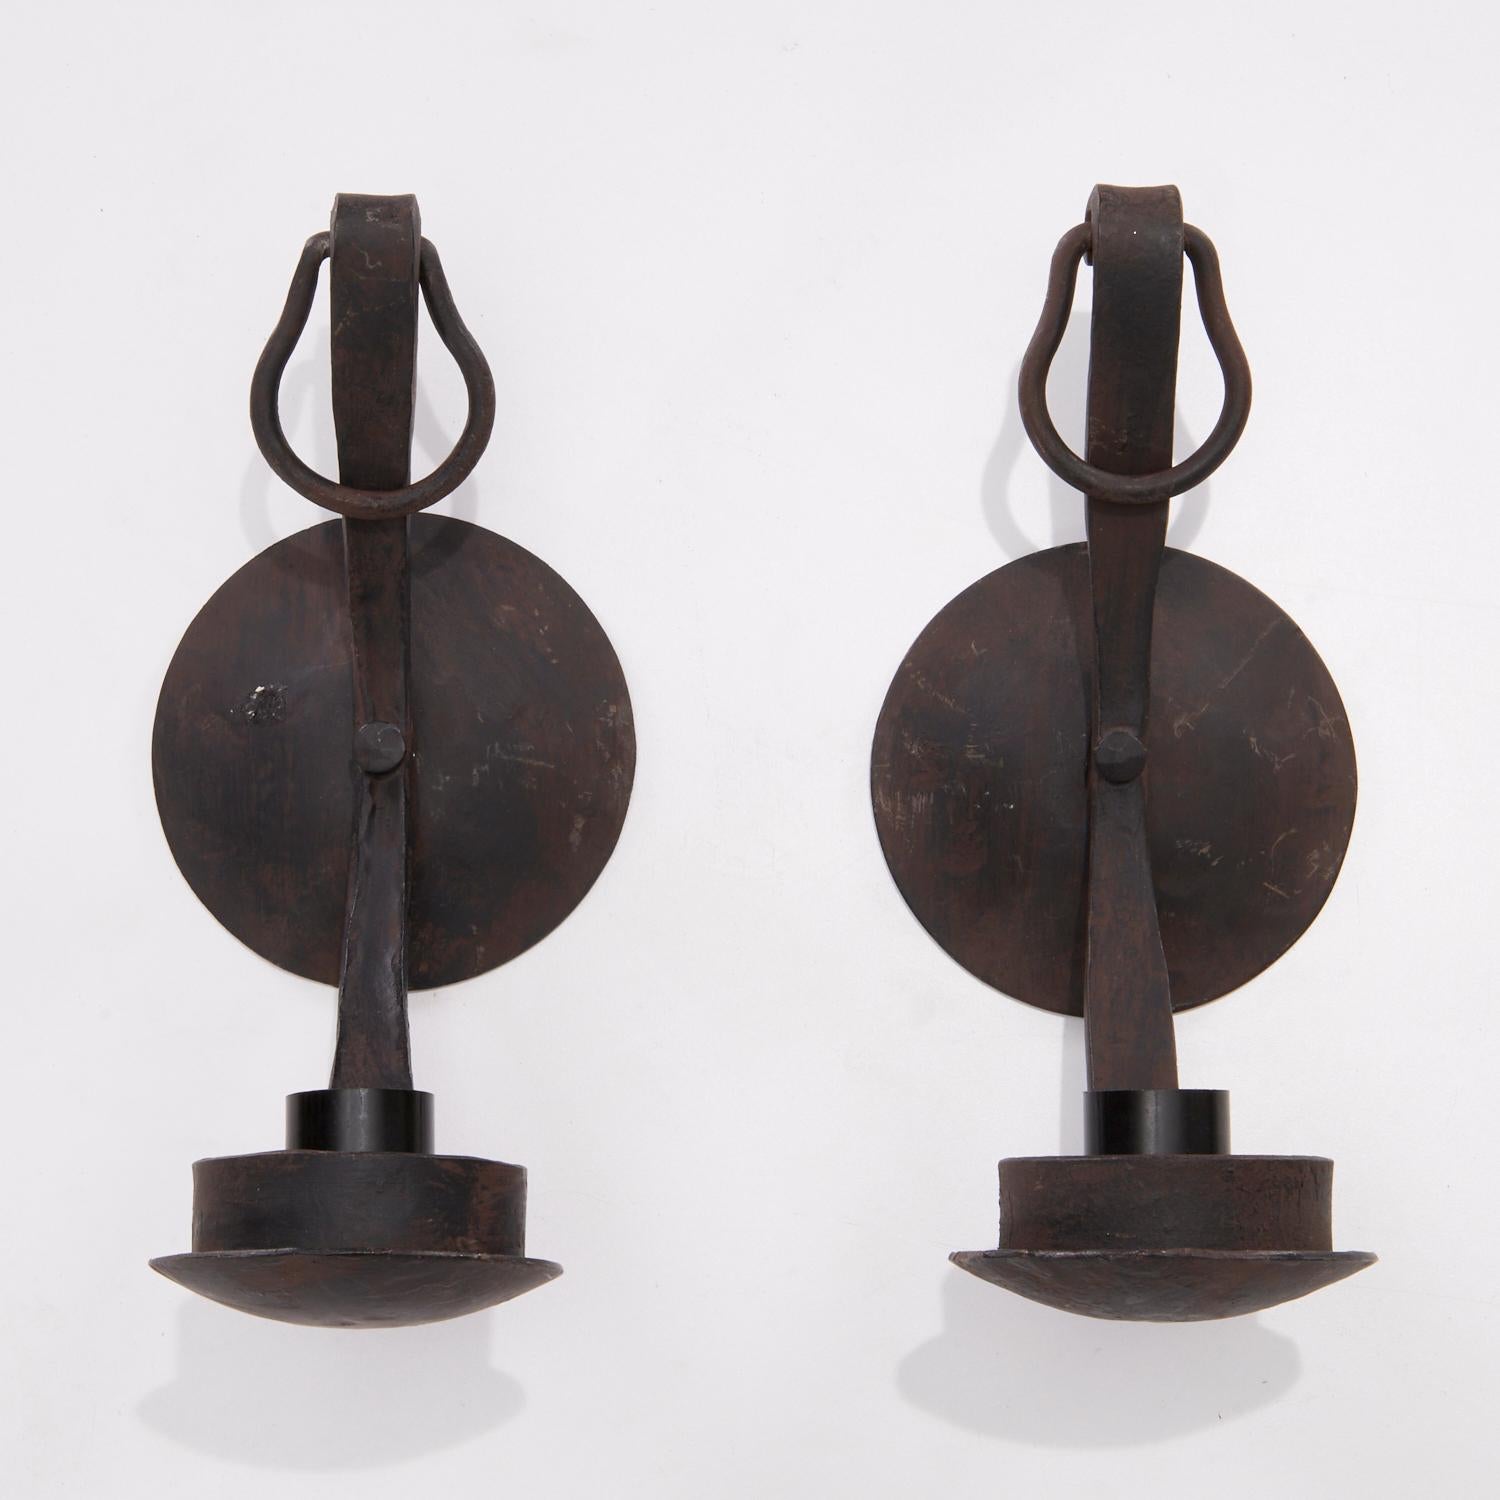 A pair of vintage French 20th c. wrought iron wall sconces in the Art Moderne style, each with a single candle bulb socket. Wired for electricity, unmarked.

These wall sconces are very versatile in terms of design style. Farmhouse Modern,